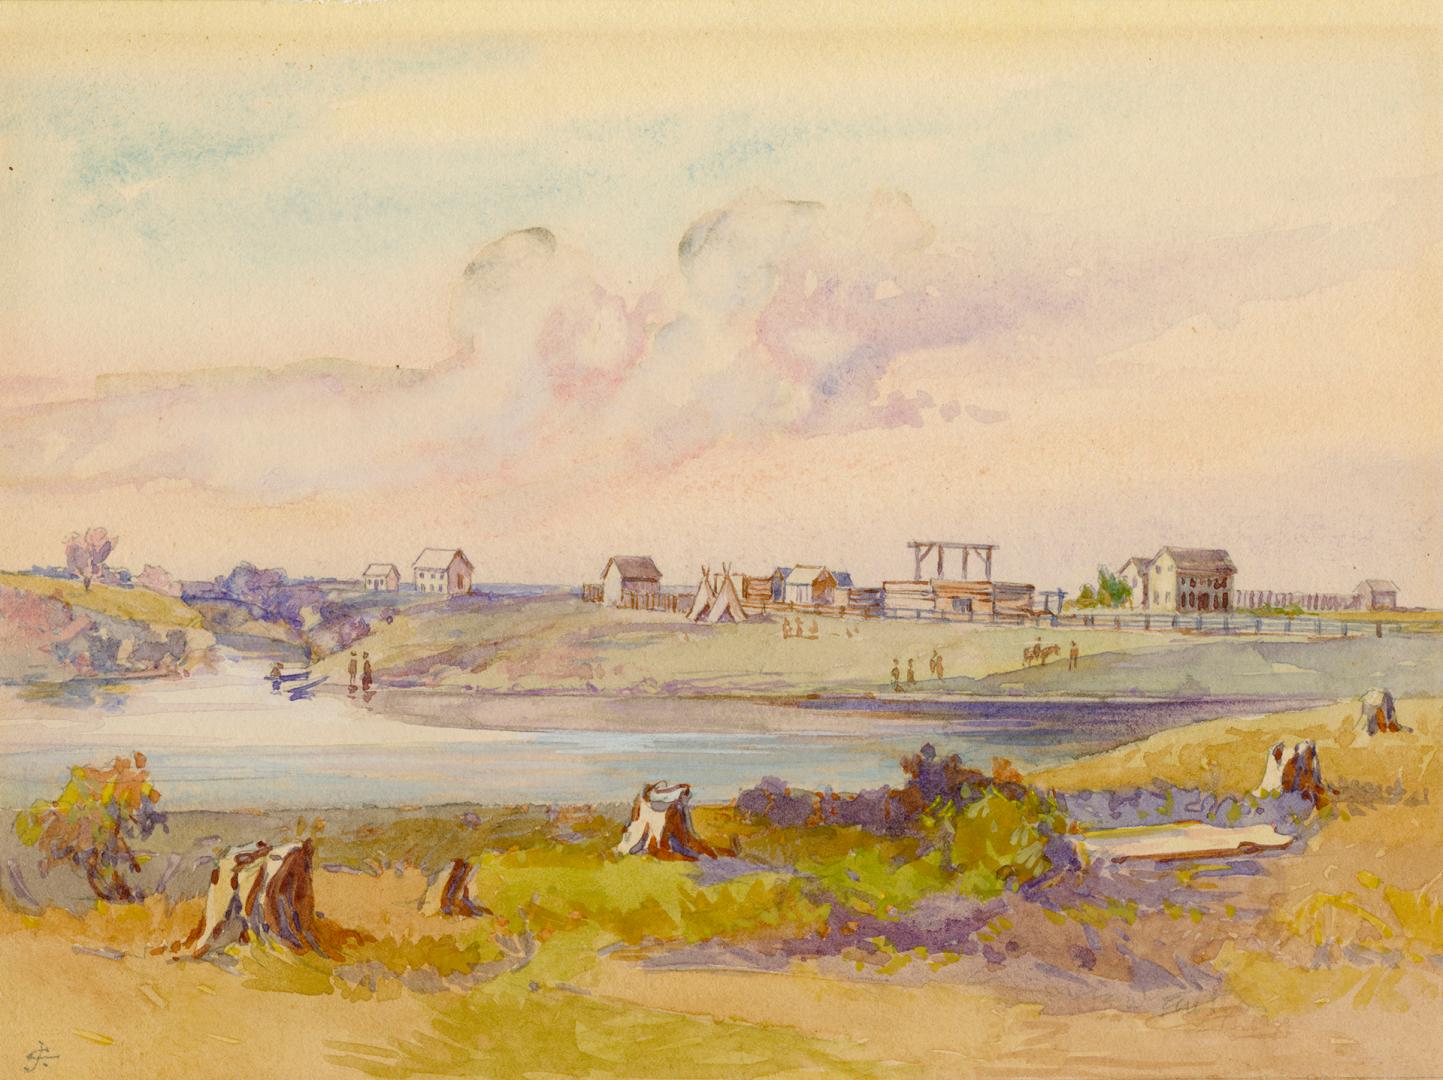 A drawing of a group of buildings on a small hill next to a river.